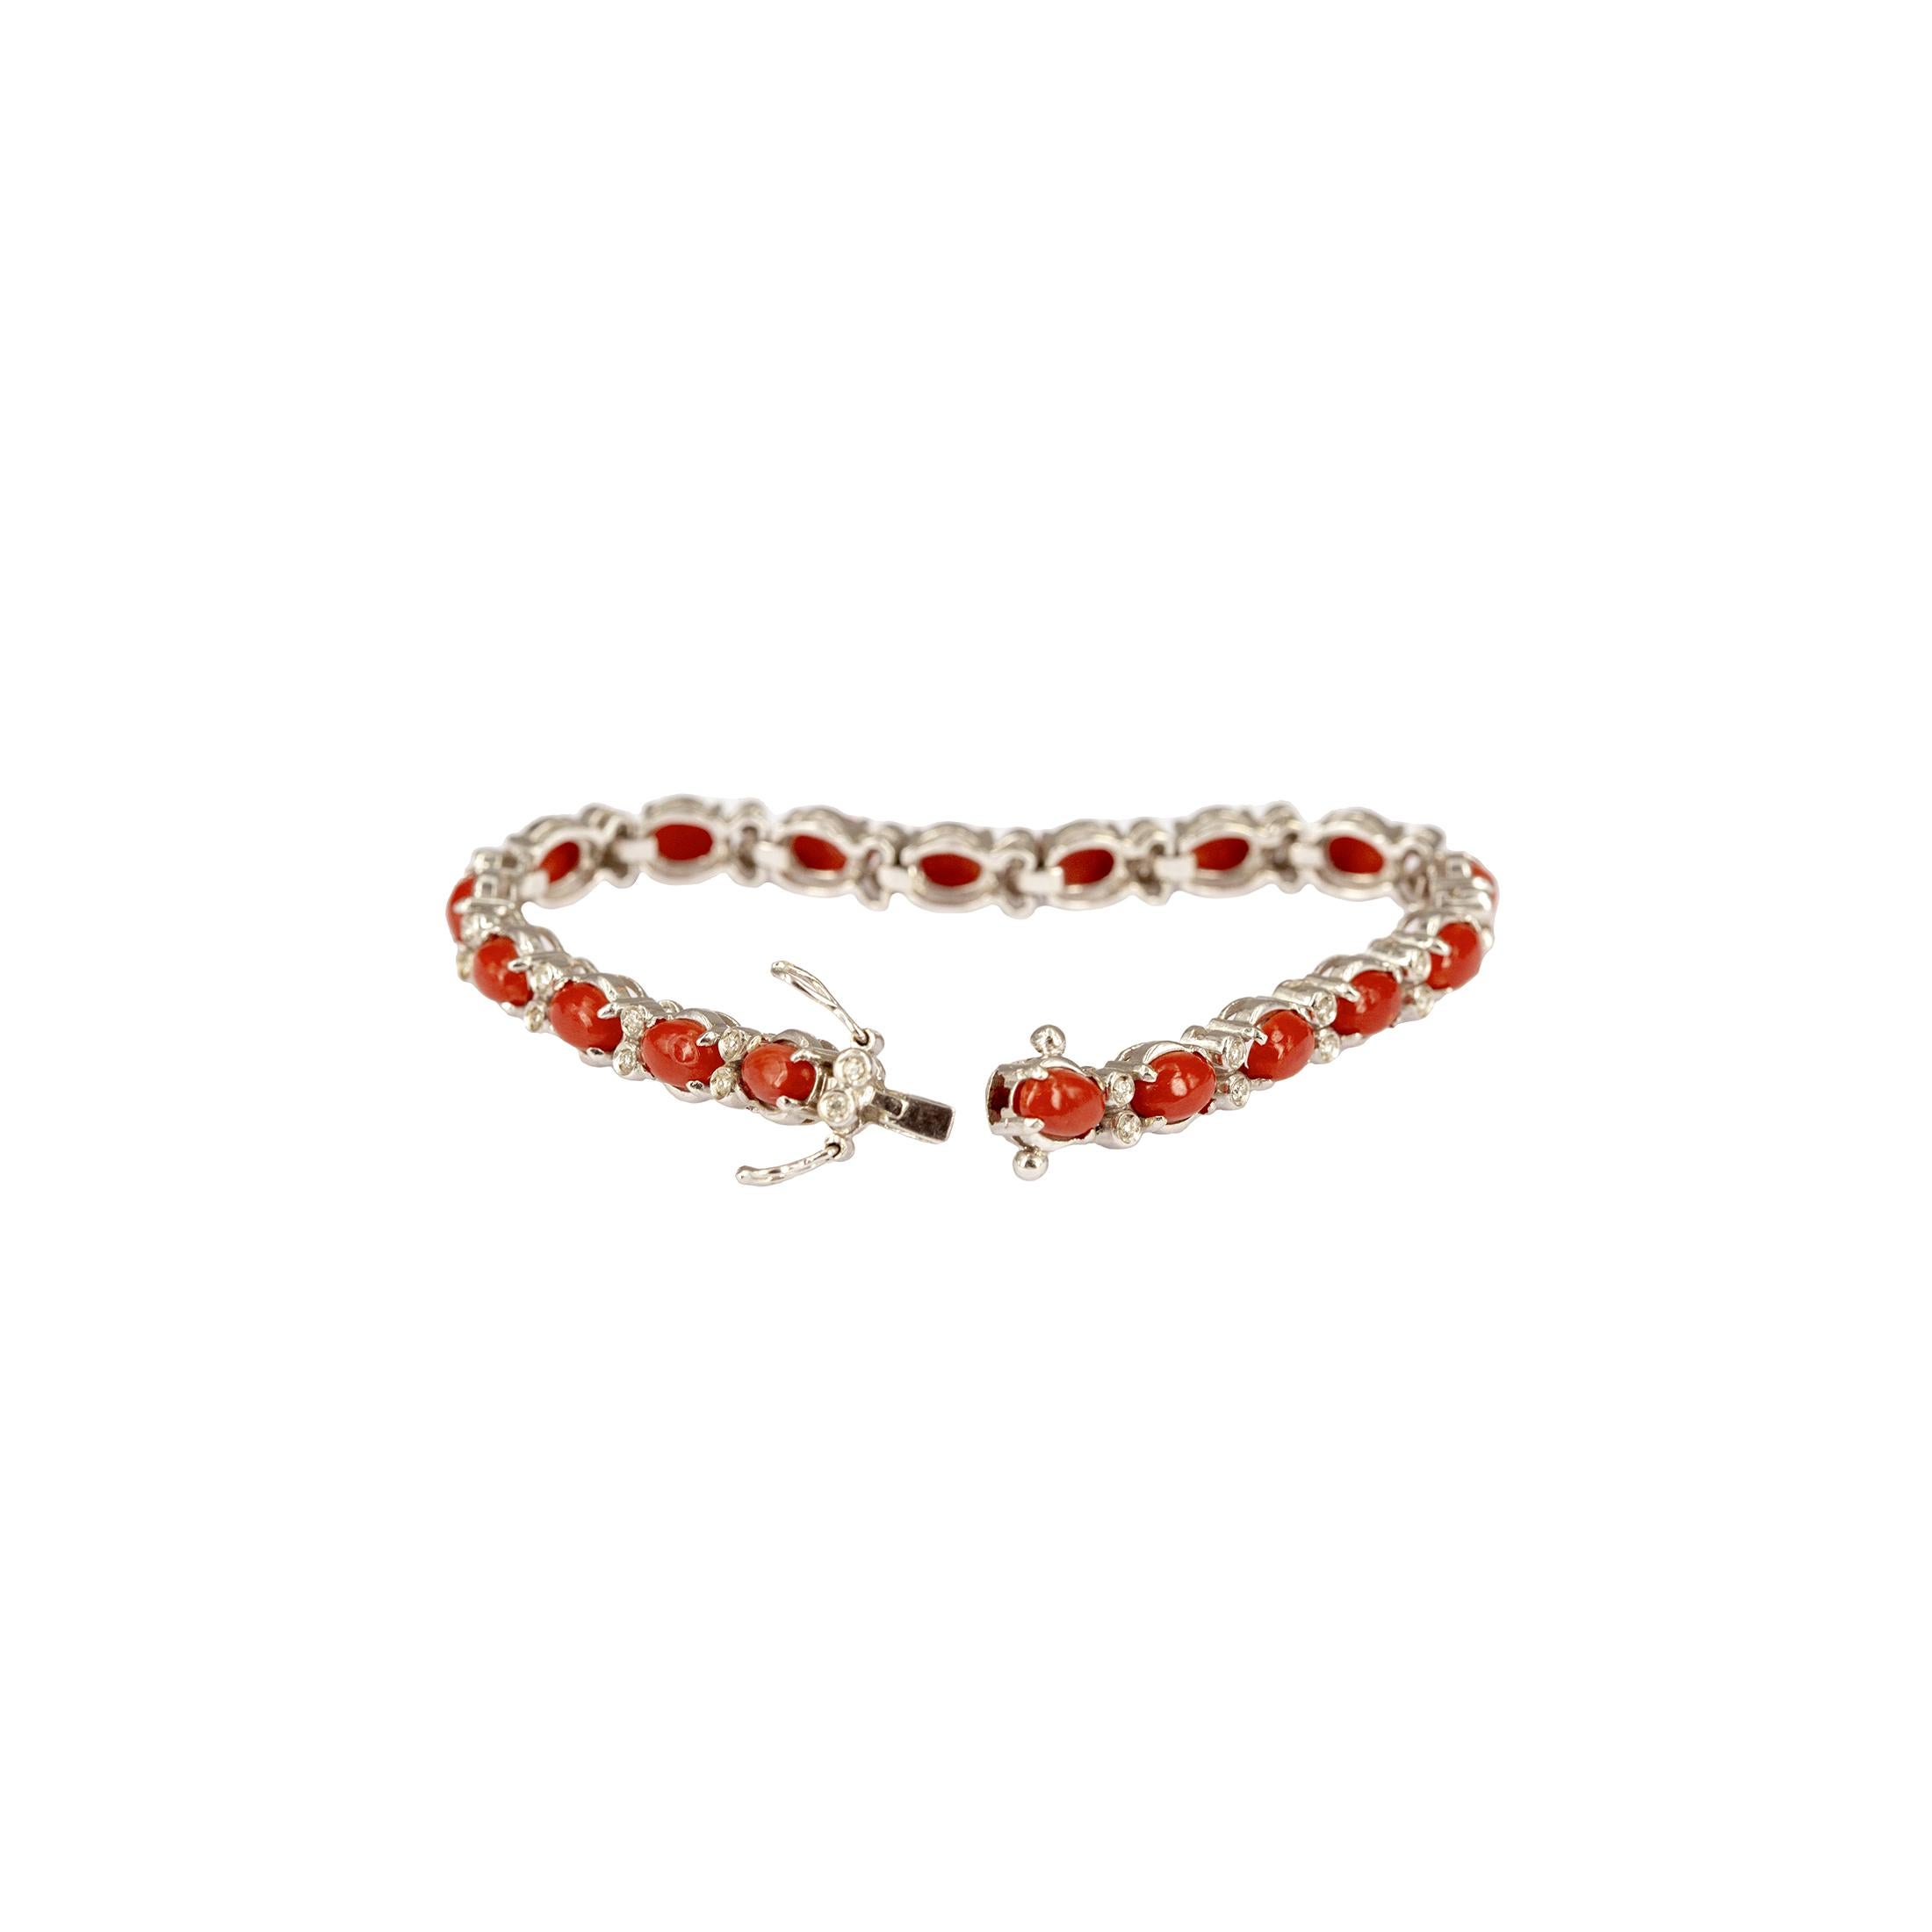 18 carat white gold tennis bracelet with 18 oval natural corals and 36 round diamonds.  
Total  length is 16cm, weight - 16gm




